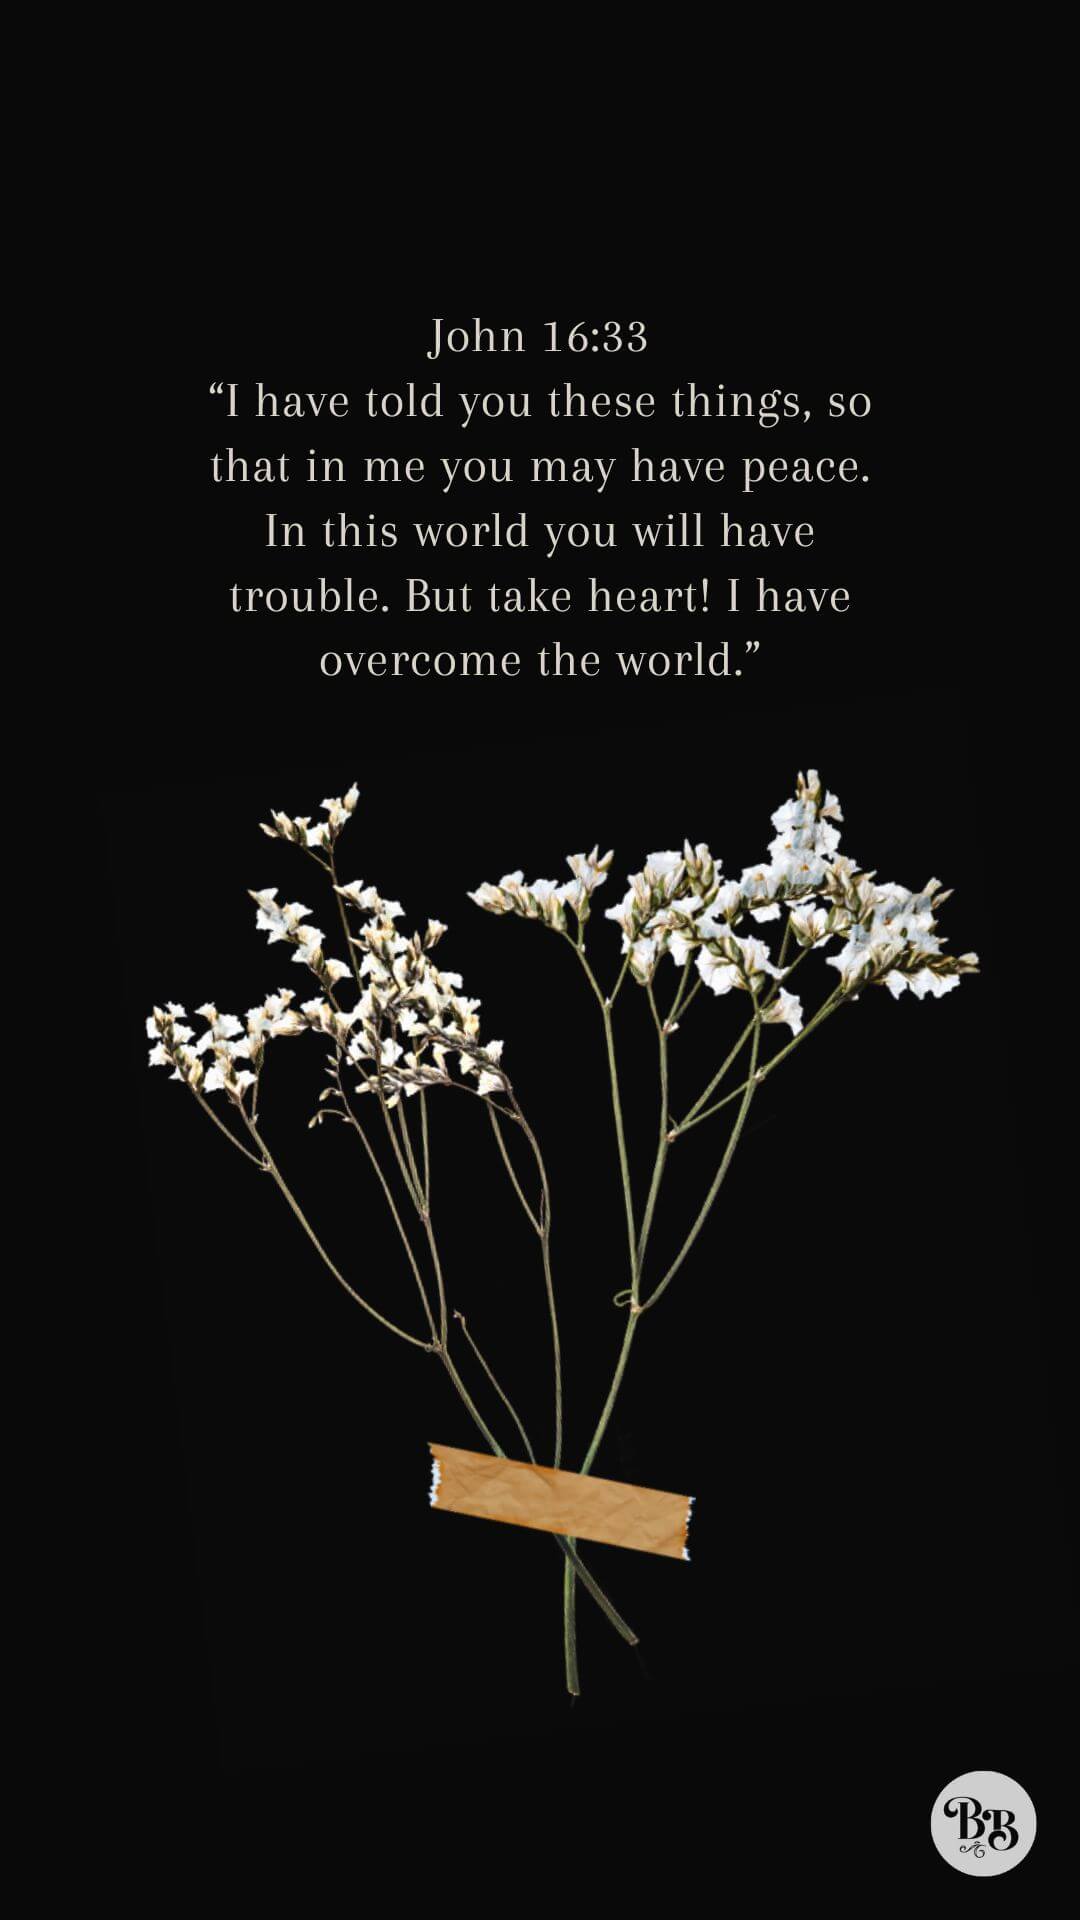 John 16:33: “I have told you these things, so that in me you may have peace. In this world you will have trouble. But take heart! I have overcome the world.”